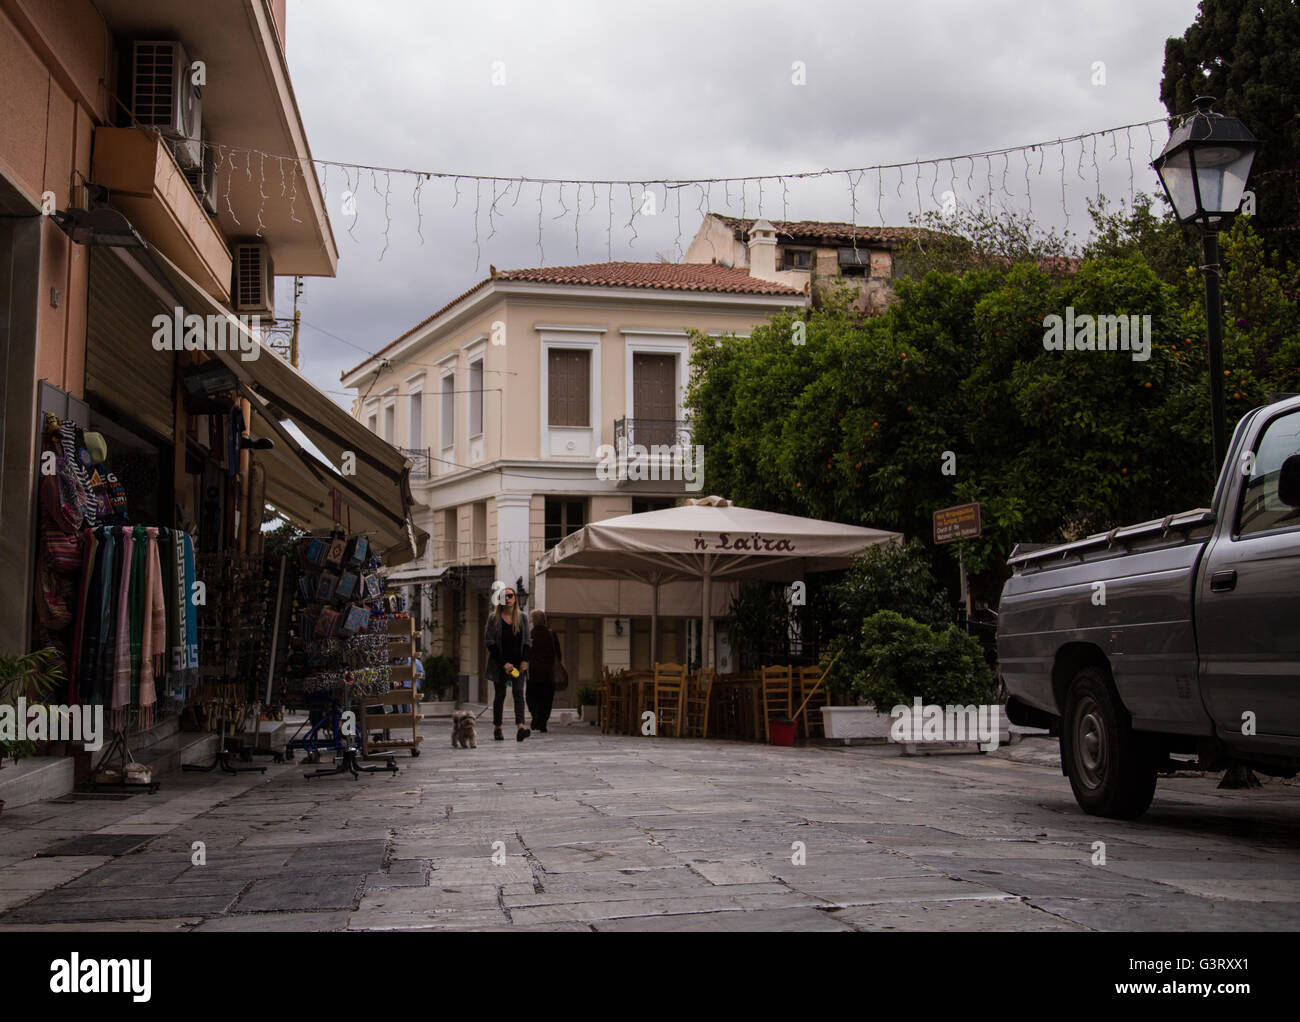 Walking through a street in Plaka, central Athens, on a cloudy day. Stock Photo